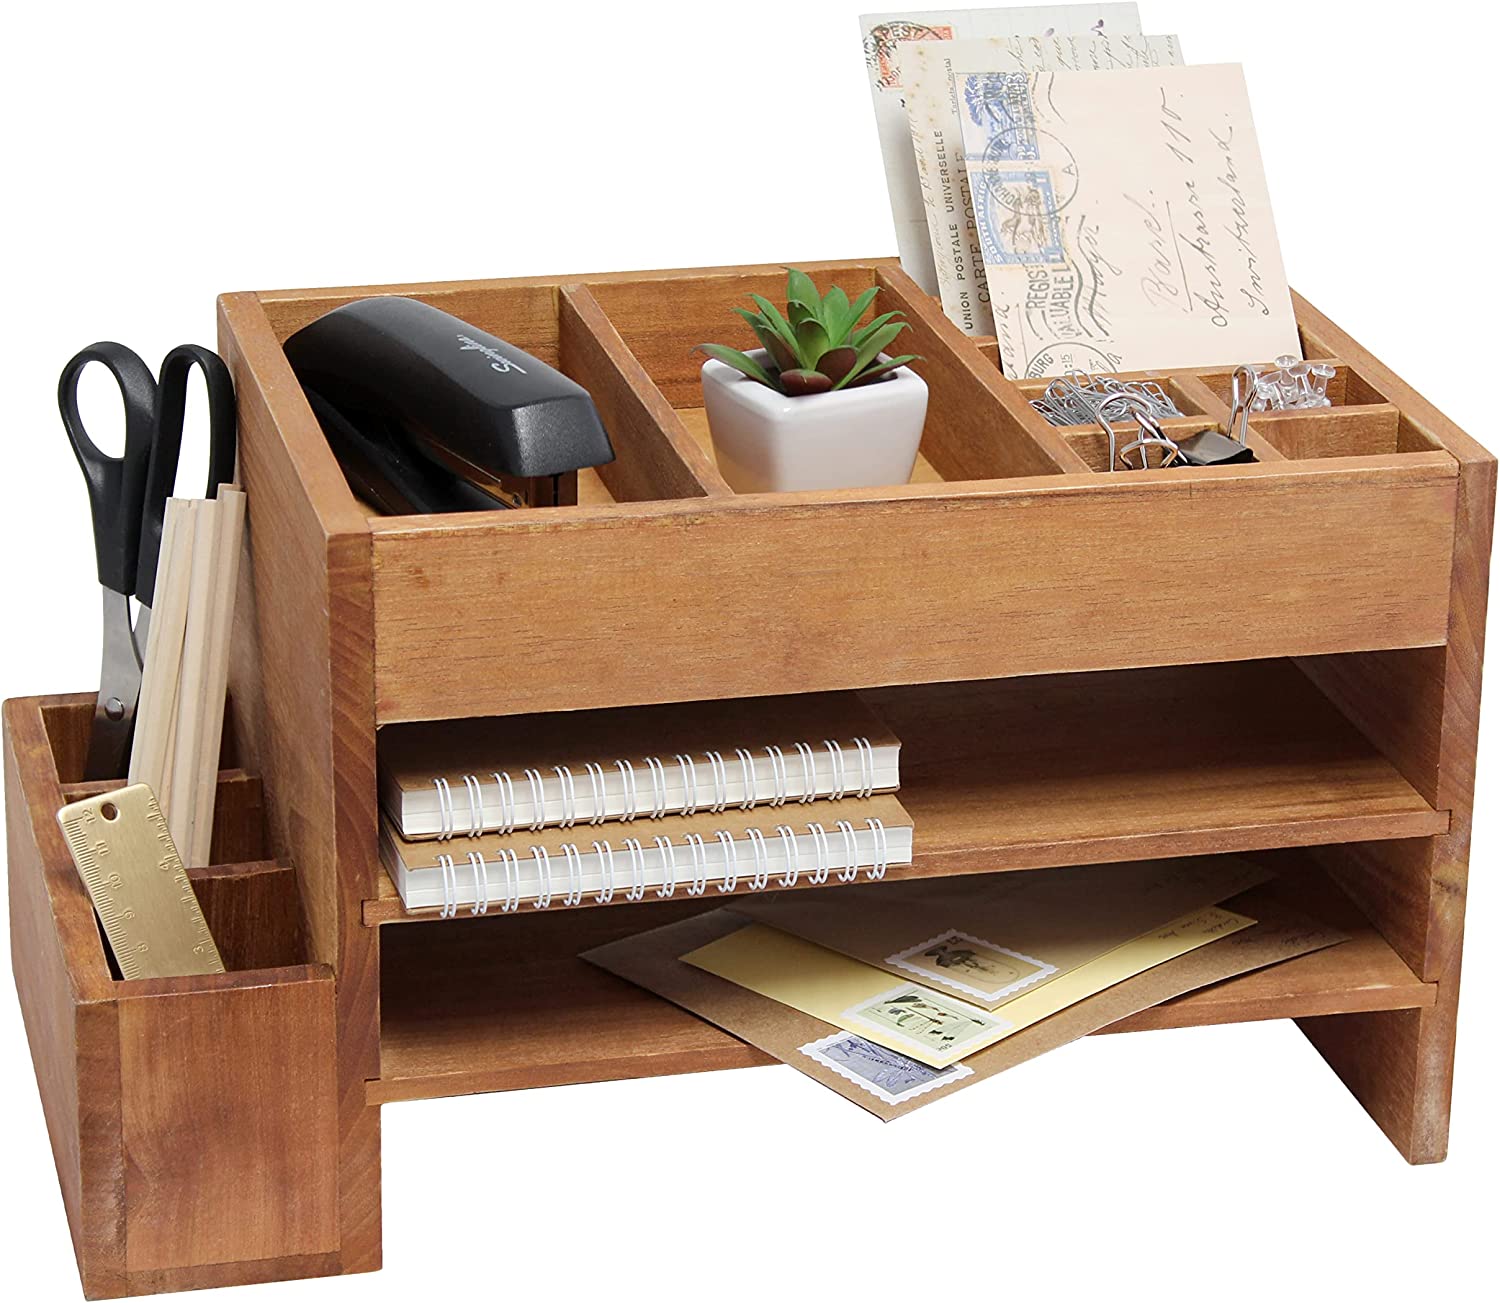 Elegant Designs HG1021-NWD Home Office Wood Tiered Organizer with Storage Cubbies and Letter Tray Desk Caddy, Natural